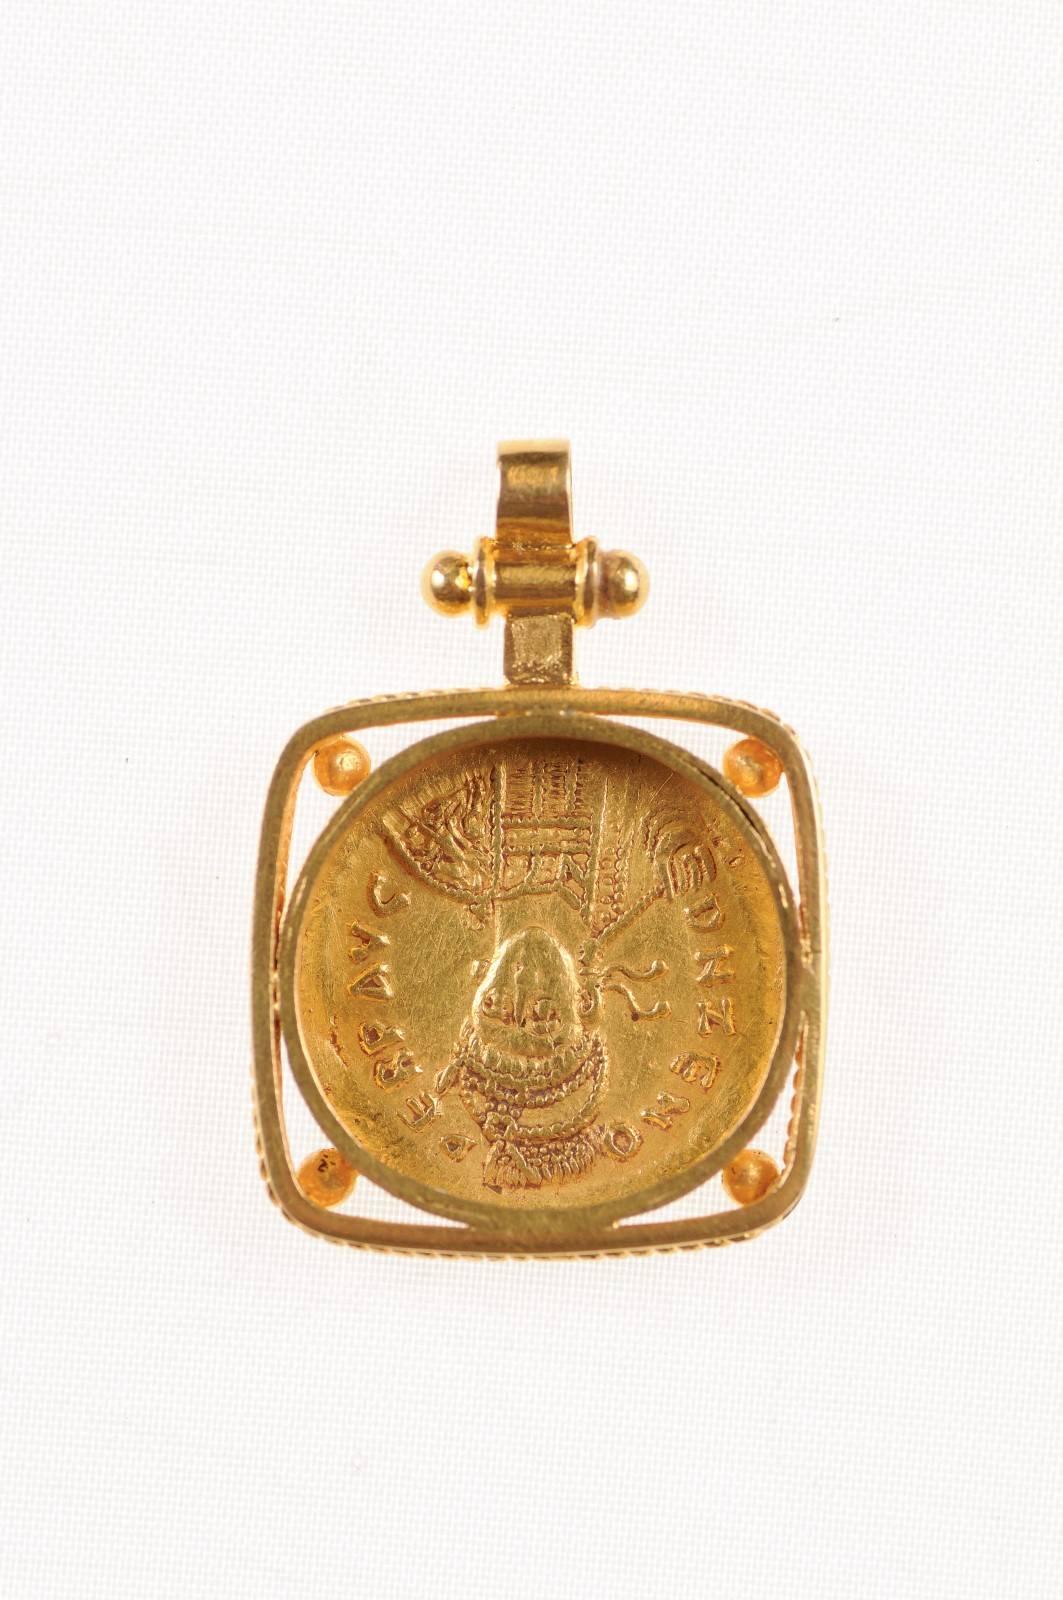 Italian Authentic Solidus Roman Imperial Coin in 22k Gold Necklace Pendant, circa 476 AD For Sale